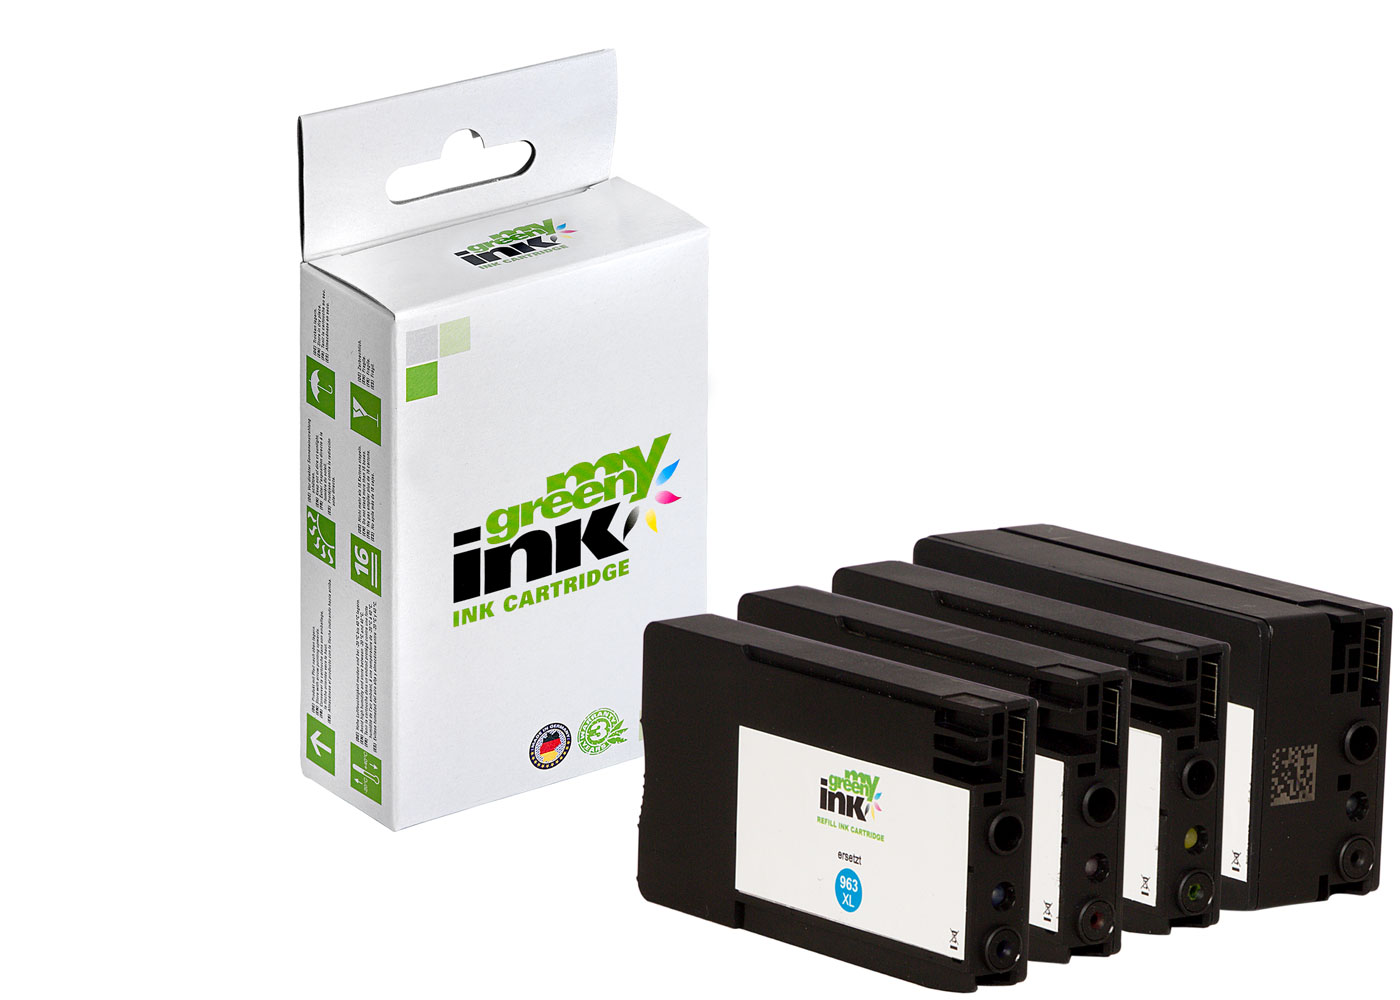 Refill ink cartridge for HP OfficeJet Pro 9010/9012 a. o.